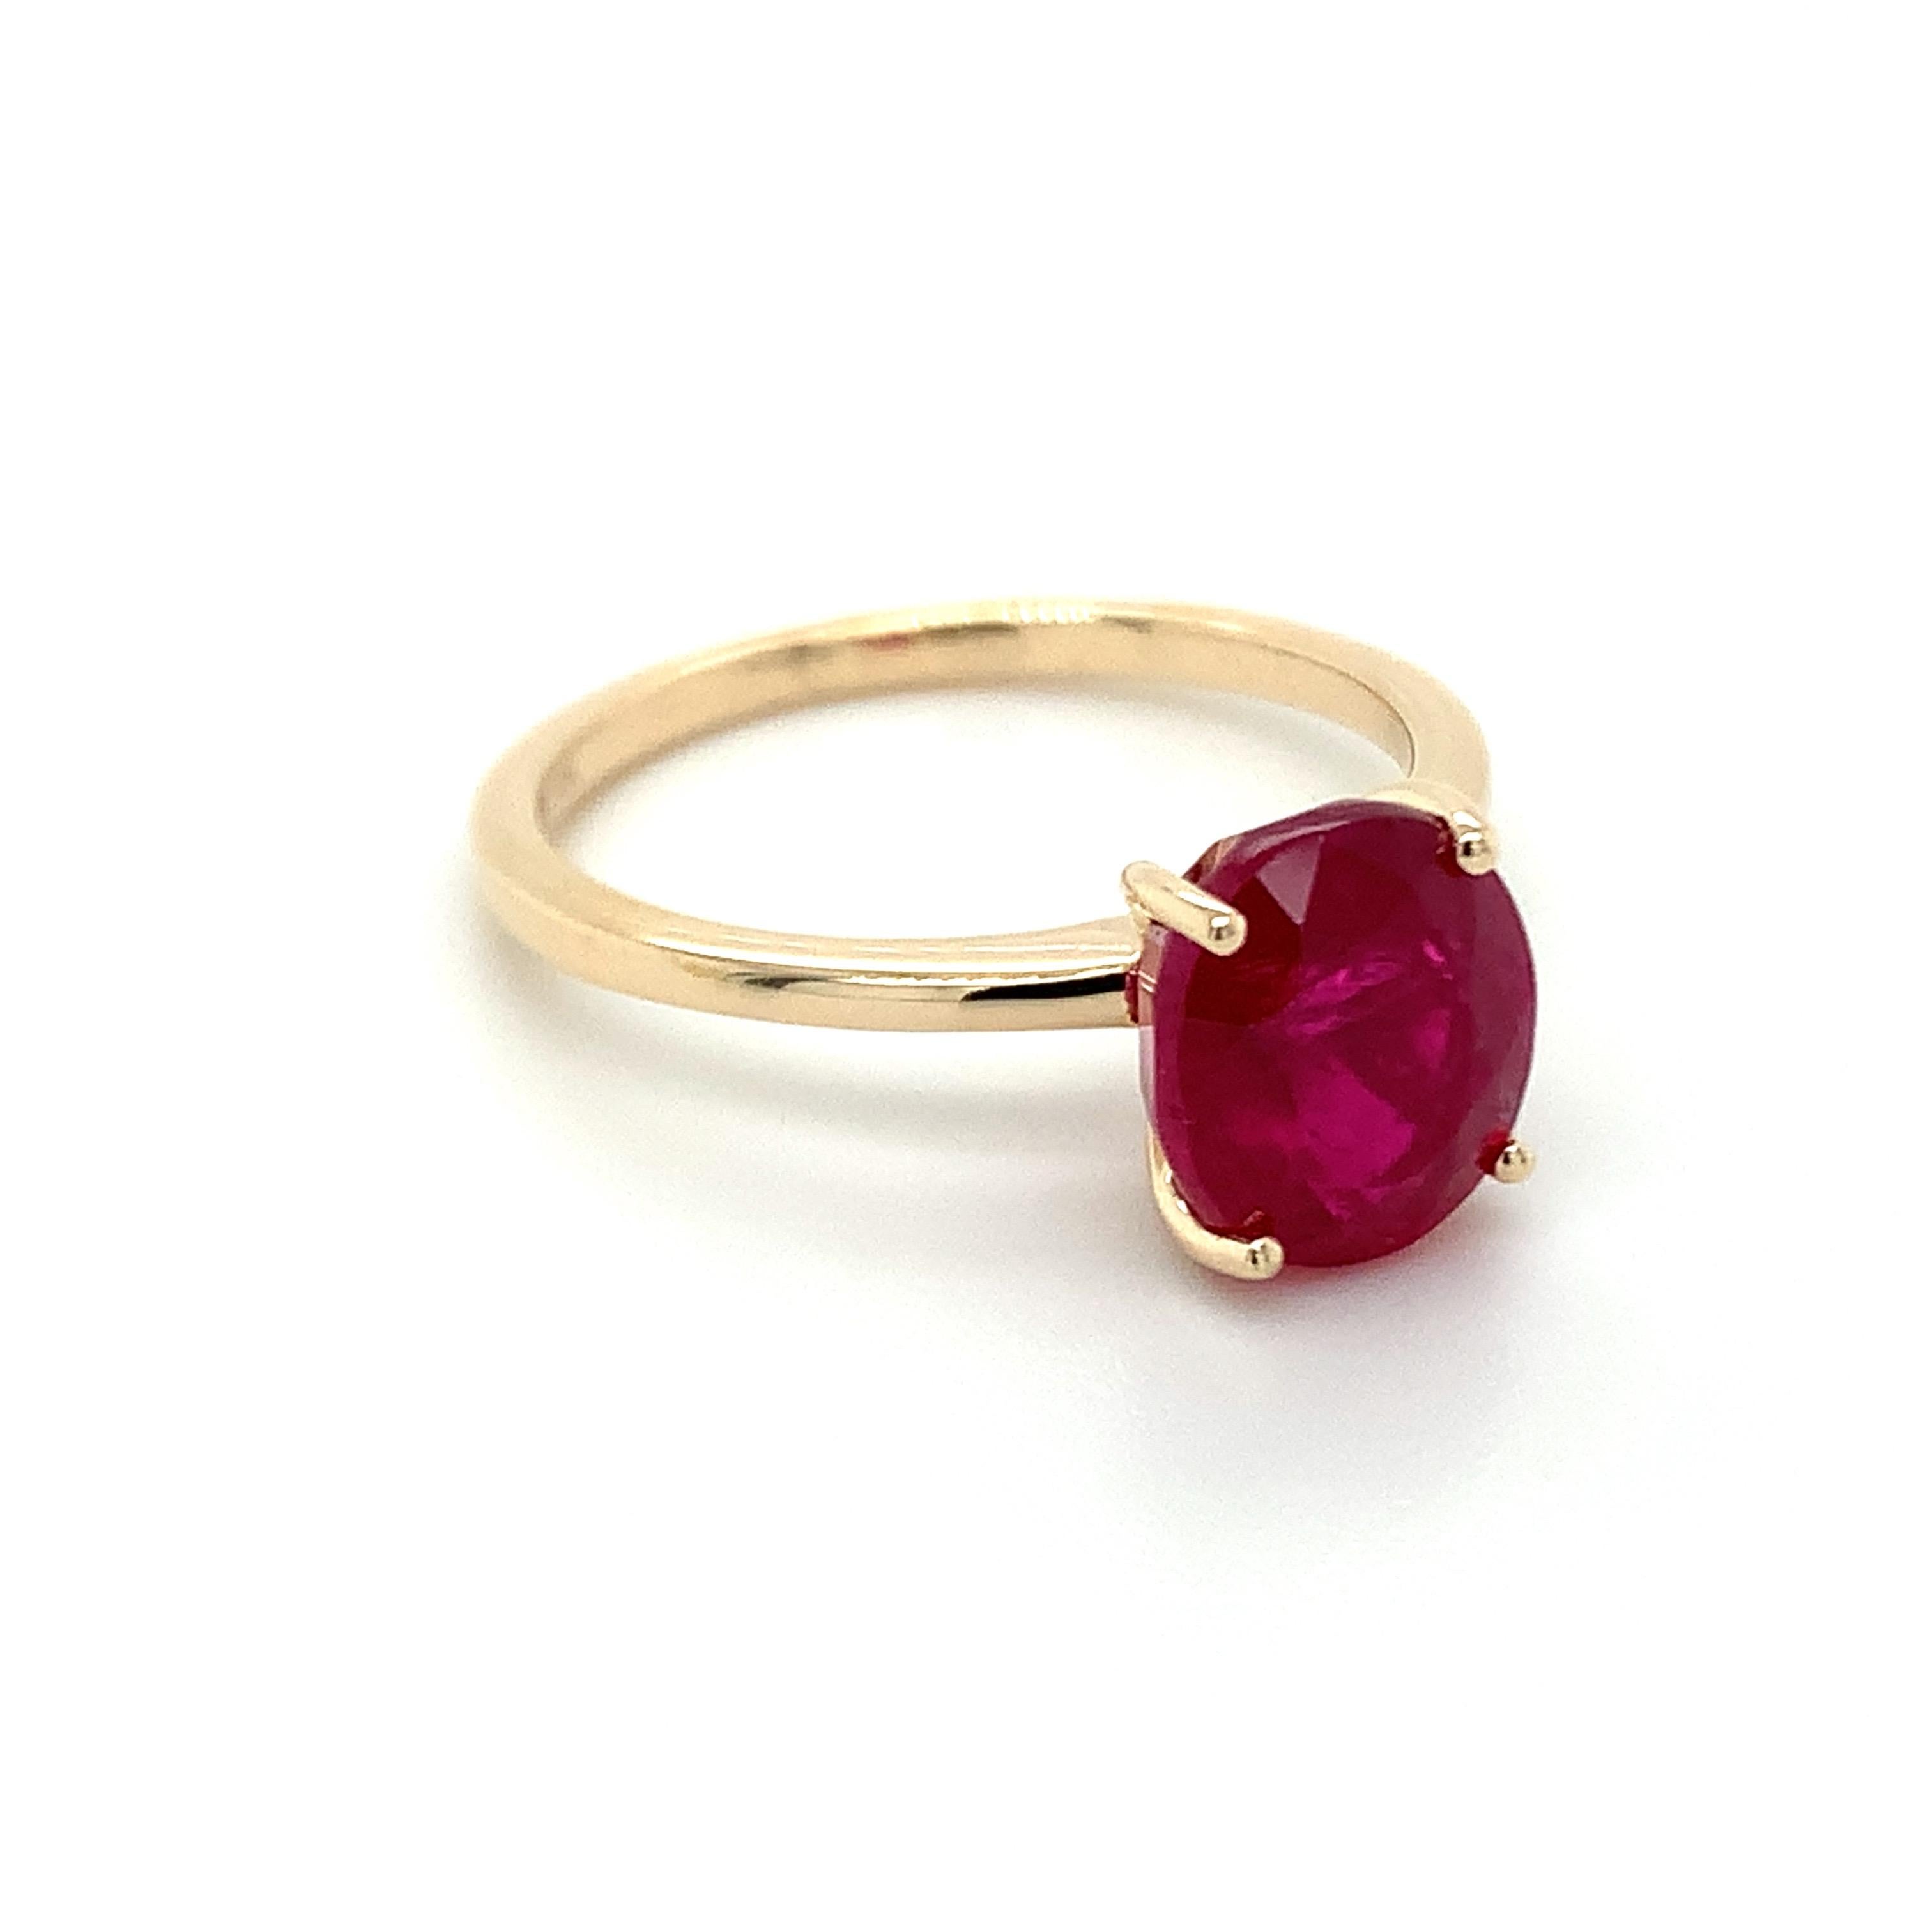 Oval shape Ruby gemstone beautifully crafted in a 10K yellow gold ring.

An exquisite red color birthstone for July. Believed to convey a status of power & wealth. Explore a vast range of precious stone Jewelry in our store. 

Centre stone is an